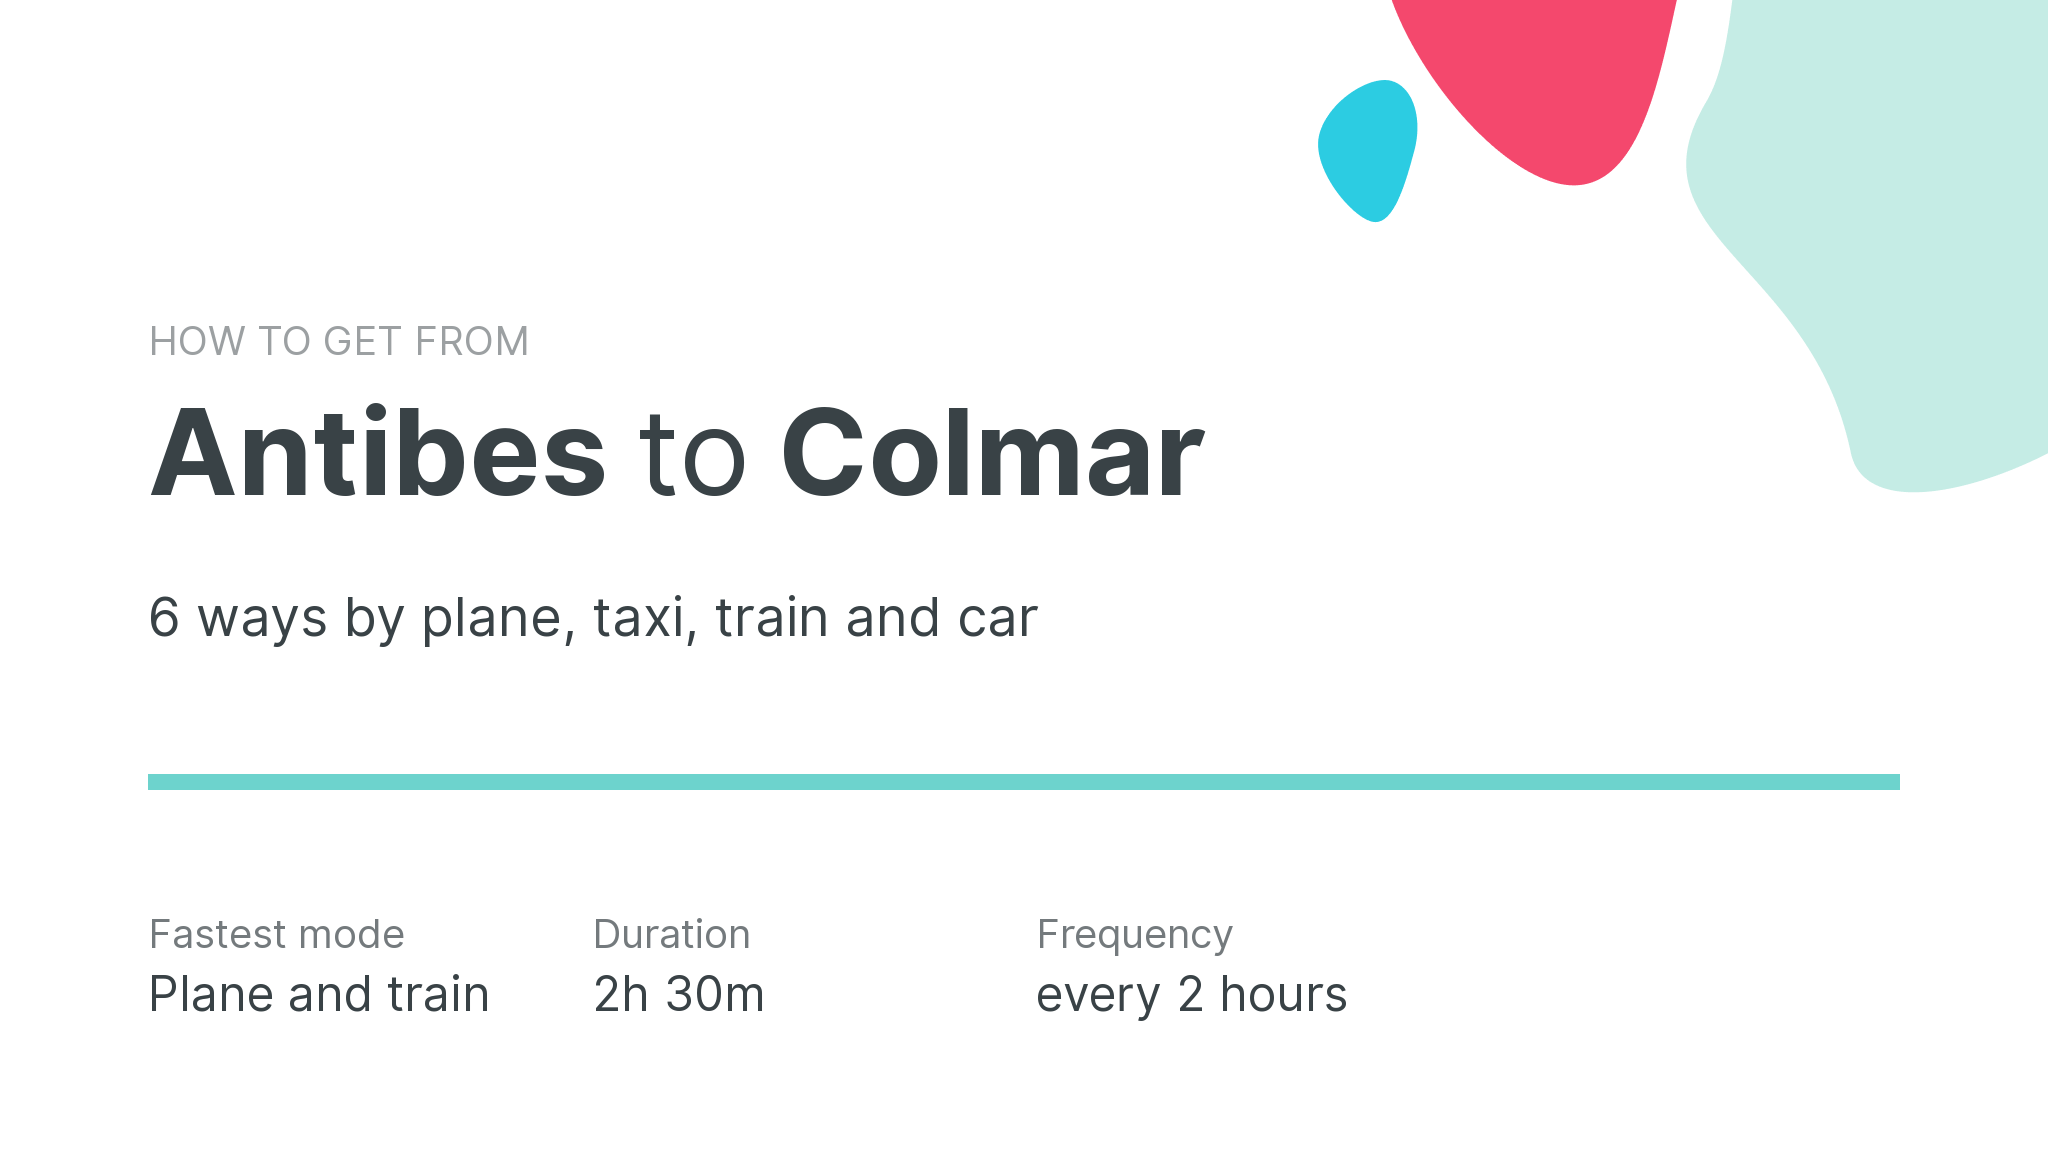 How do I get from Antibes to Colmar